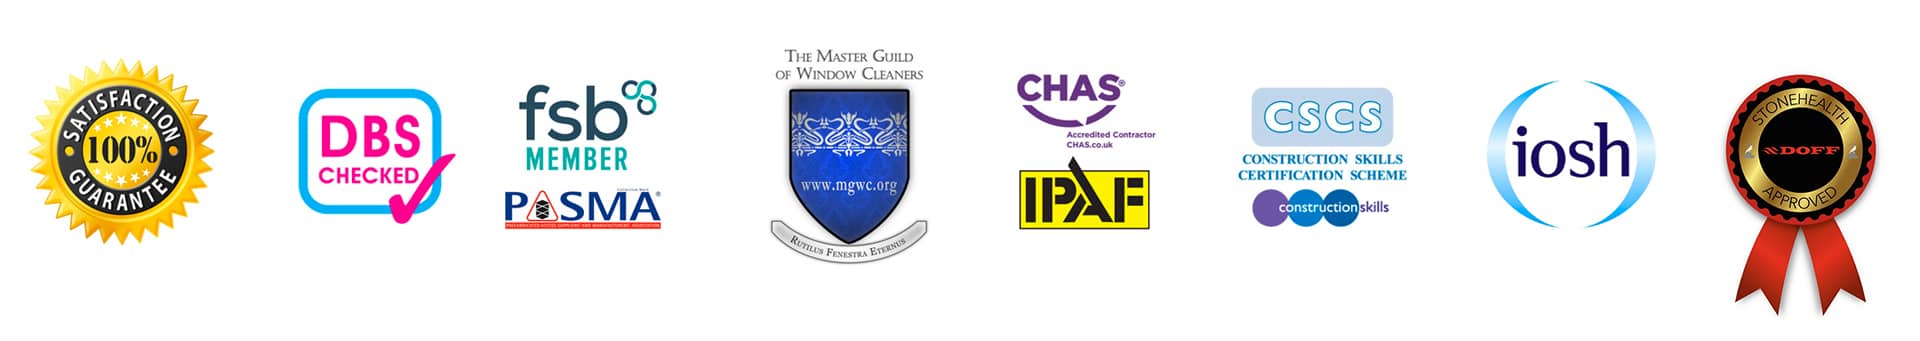 Our accreditations include DOFF approved, CHAS, IPAF, IOSH, DBS checked